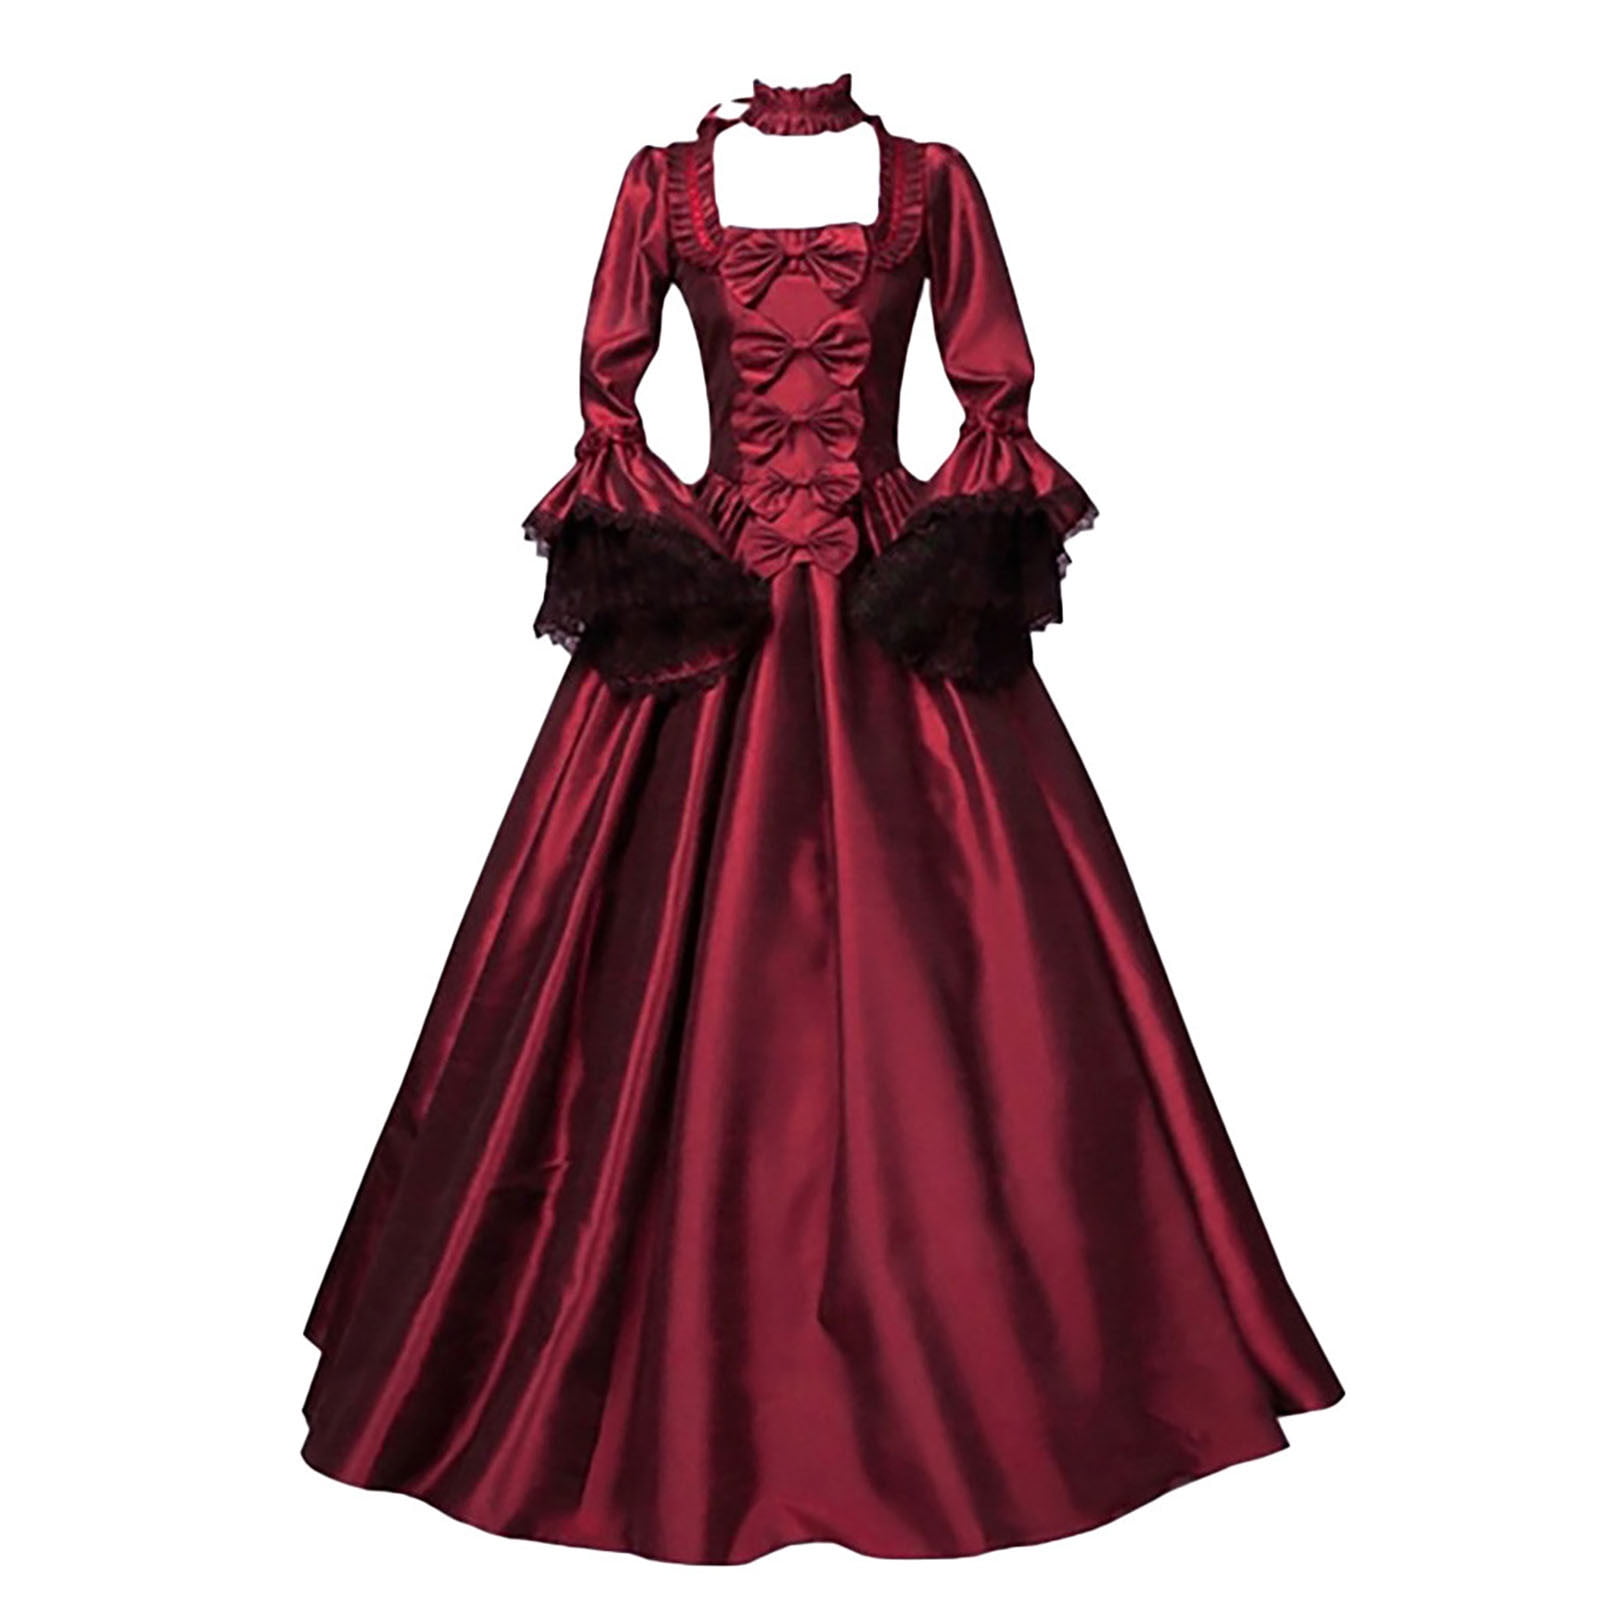 Medieval Victorian Women Lace Half Sleeve Ball Gown Dress Party Palace  Cosplay | eBay